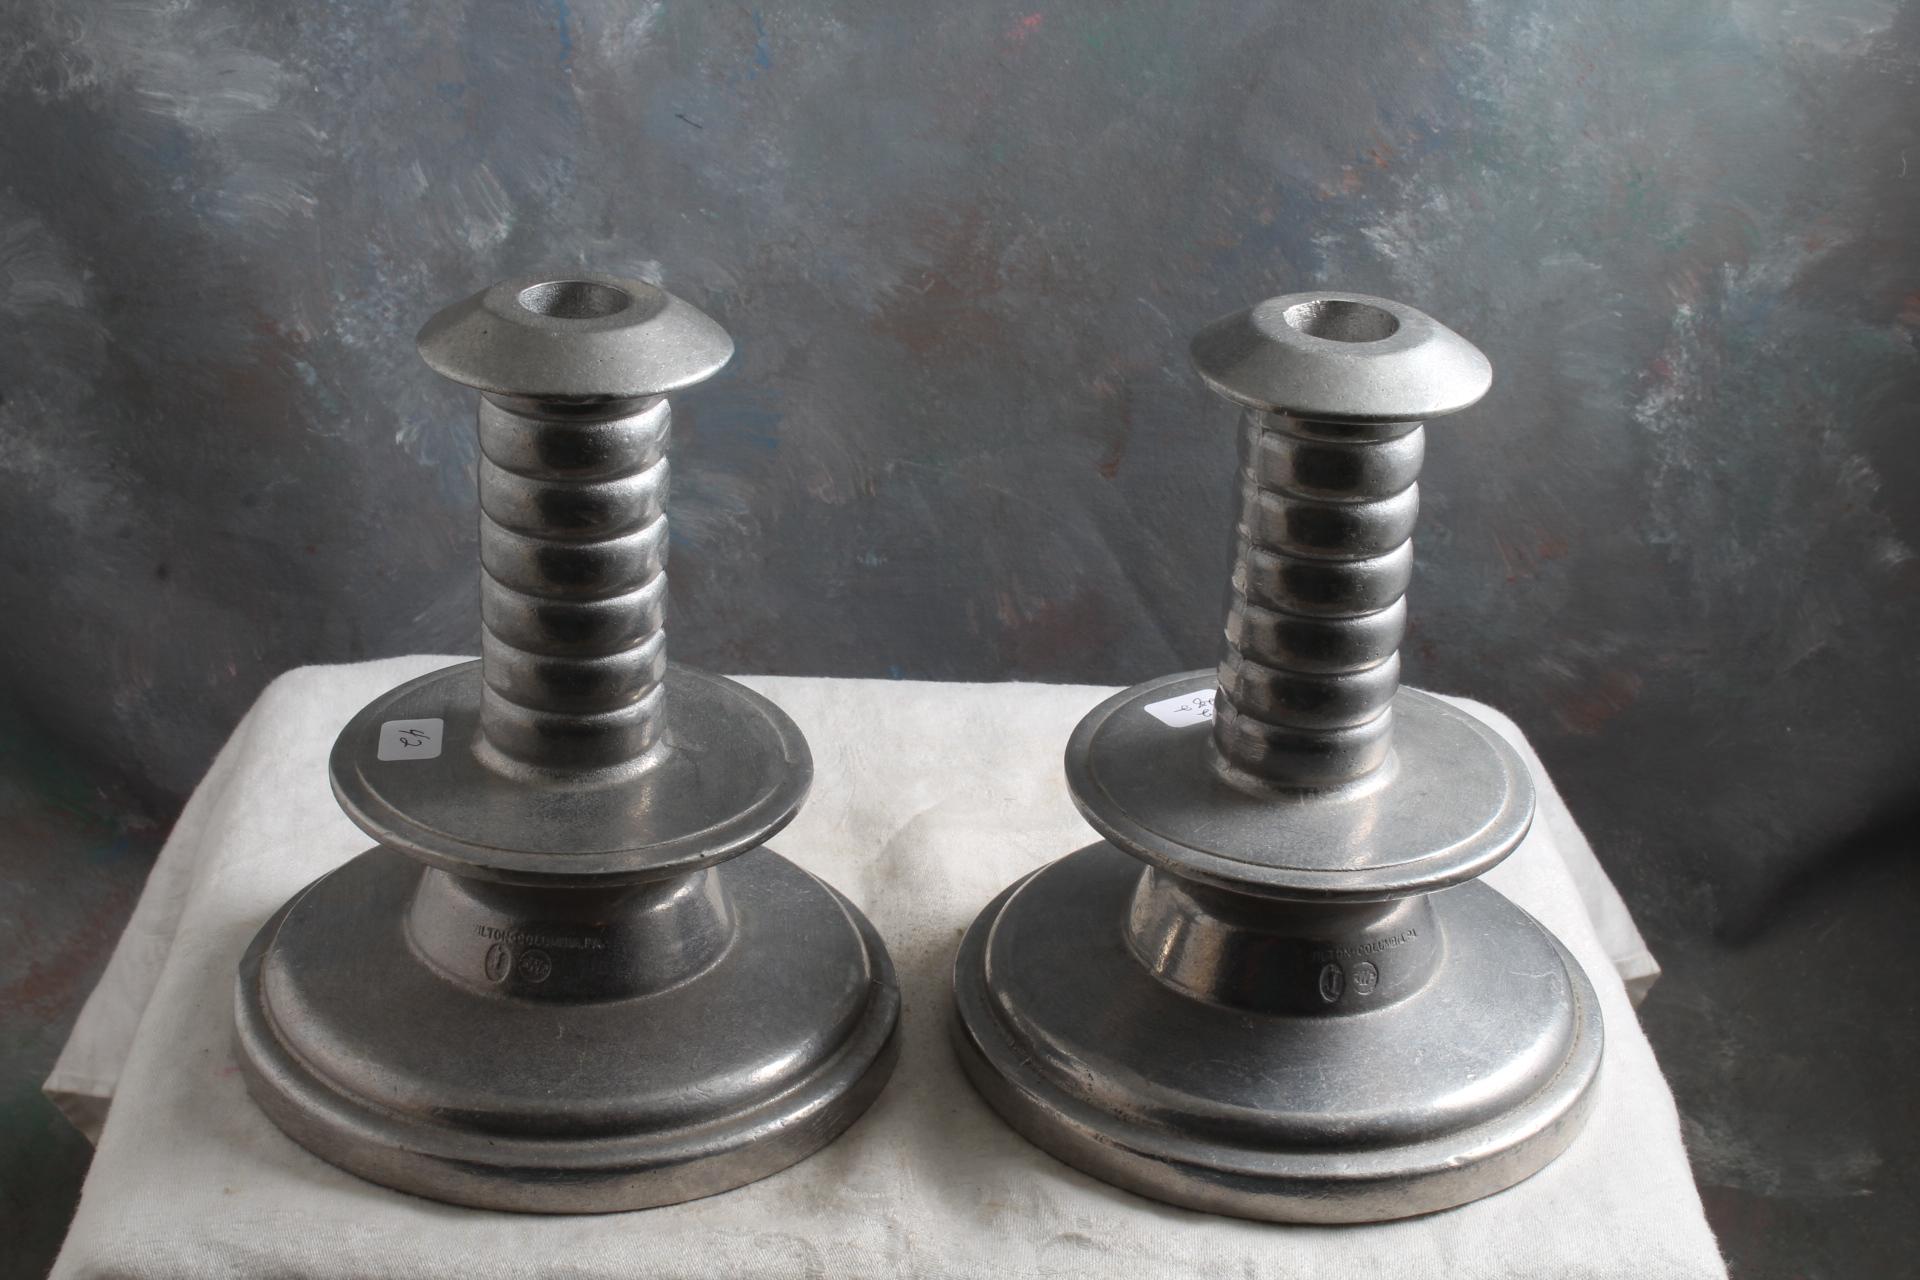 Wilton Armetal Early American Extremely Rare Pair of Candleholders 6 7/8" Tall